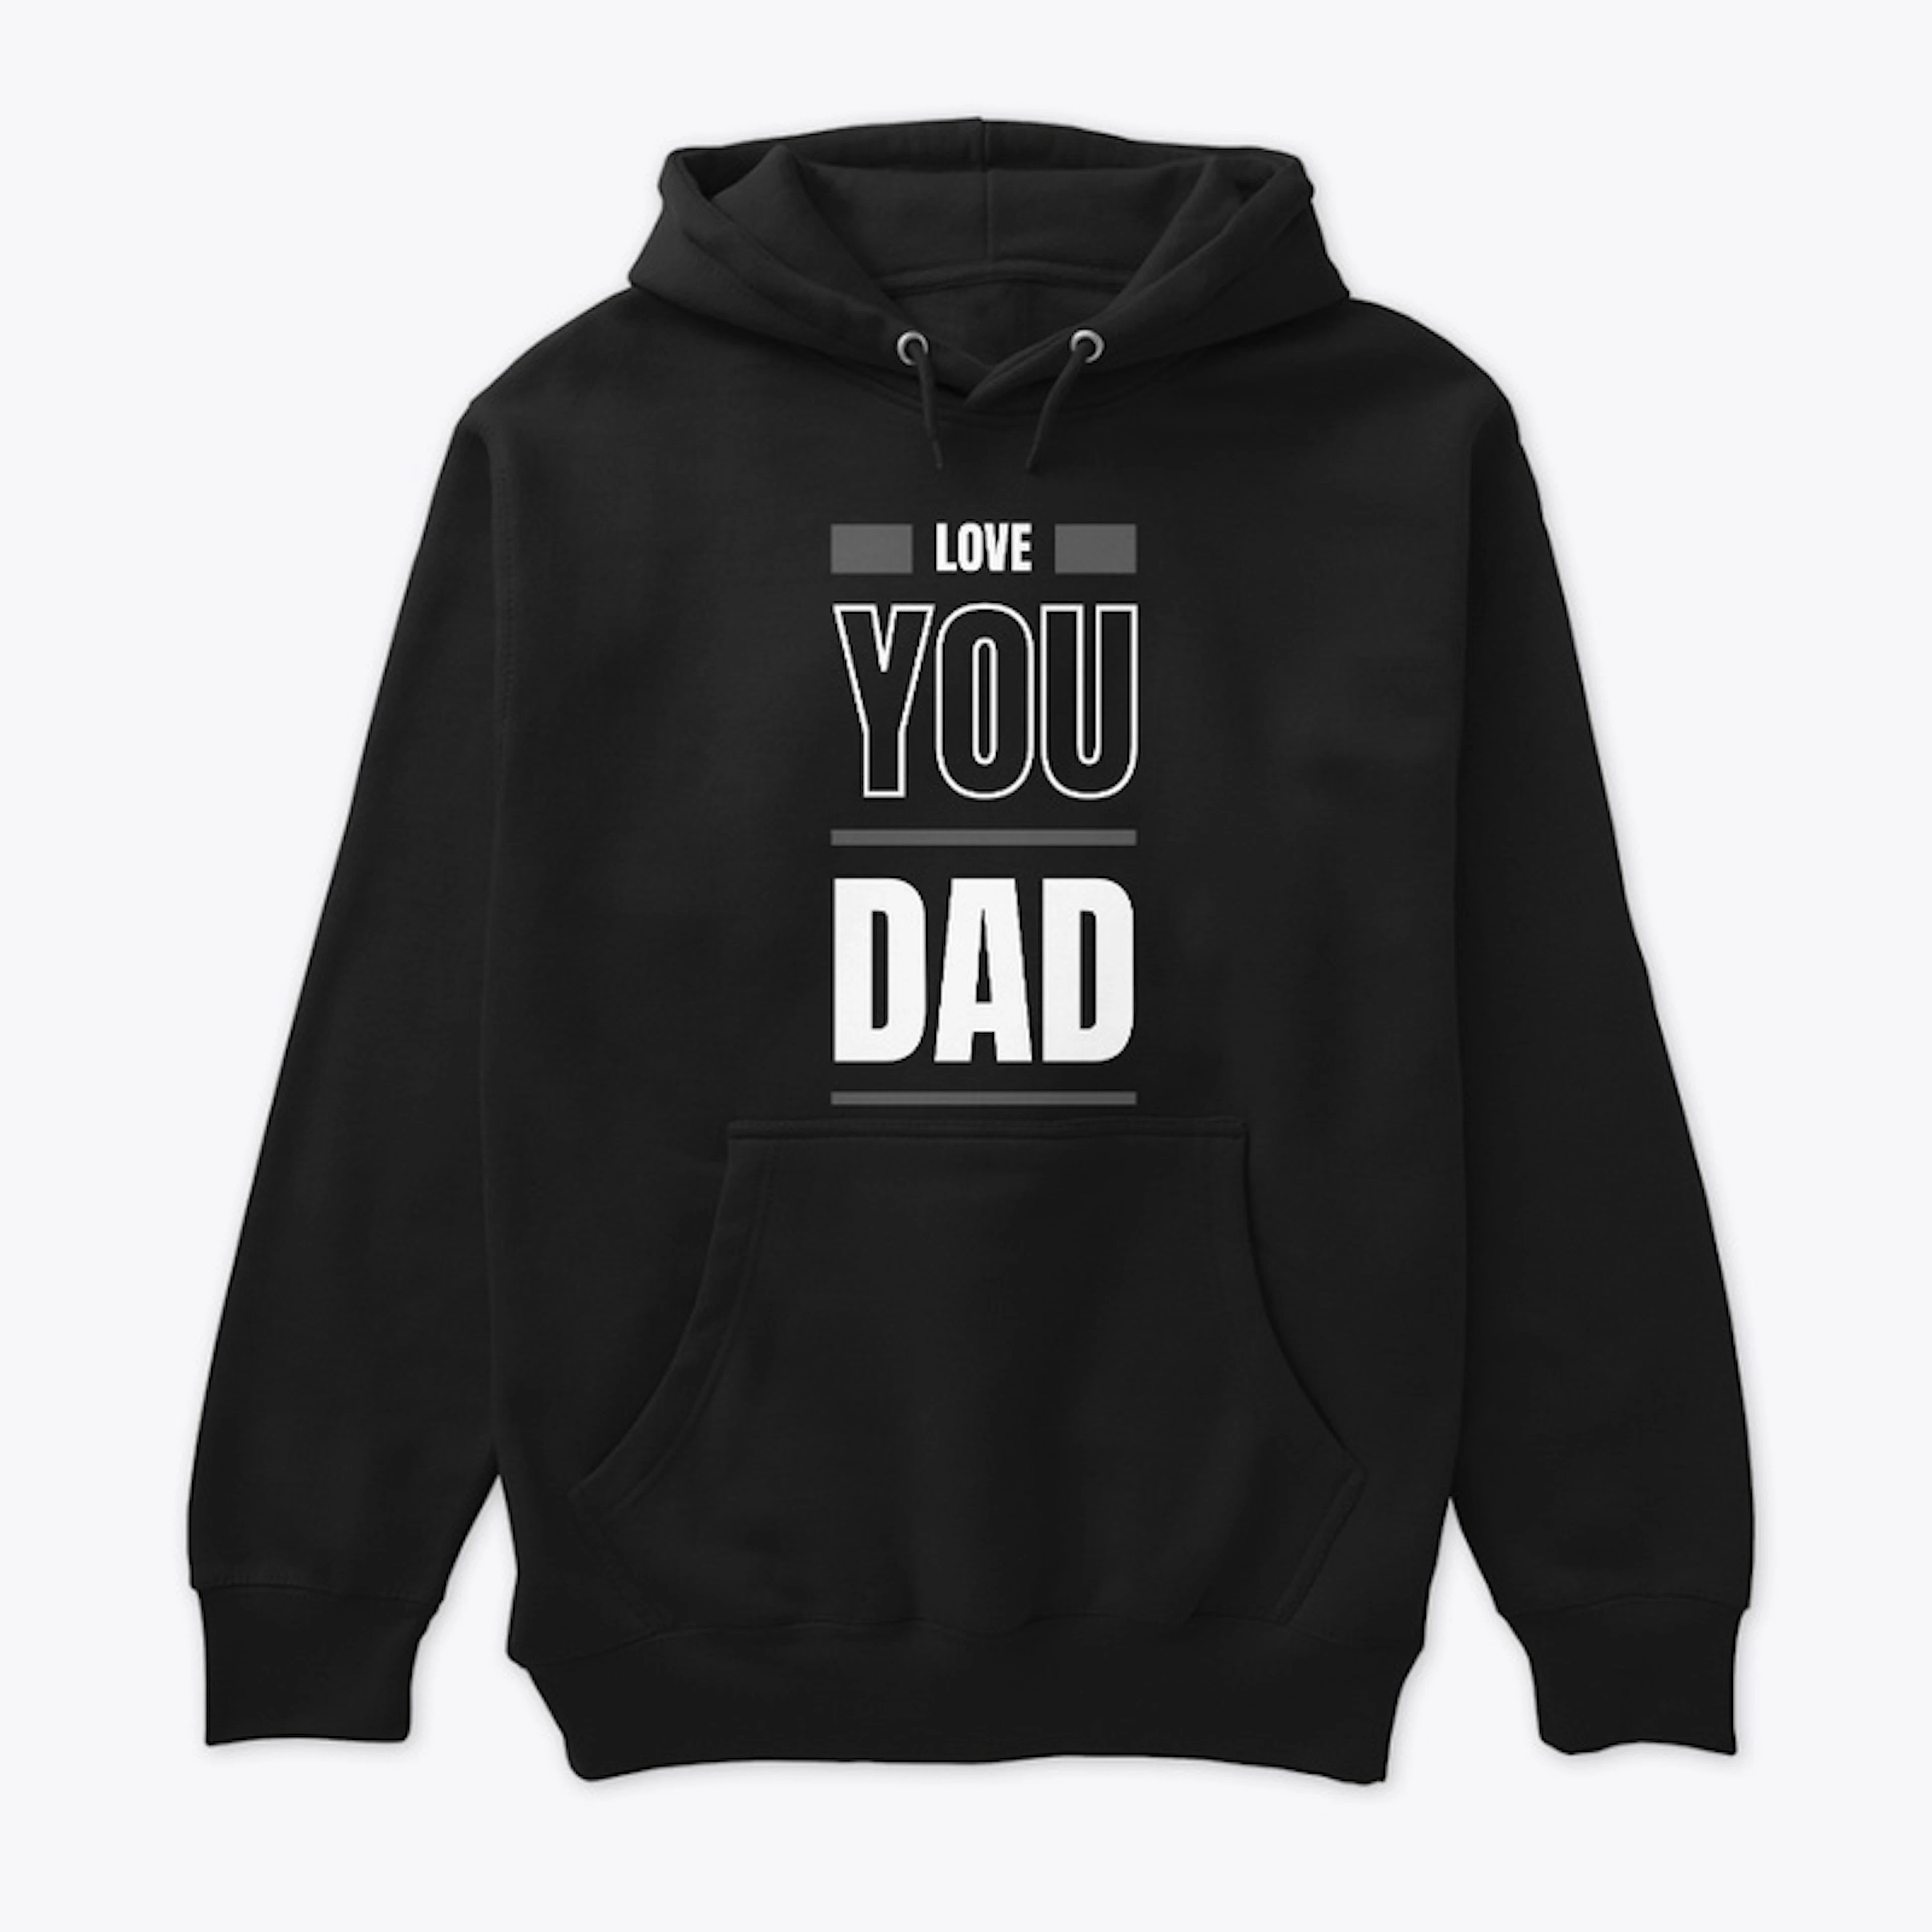 Incredible Hoodie Design For Males!